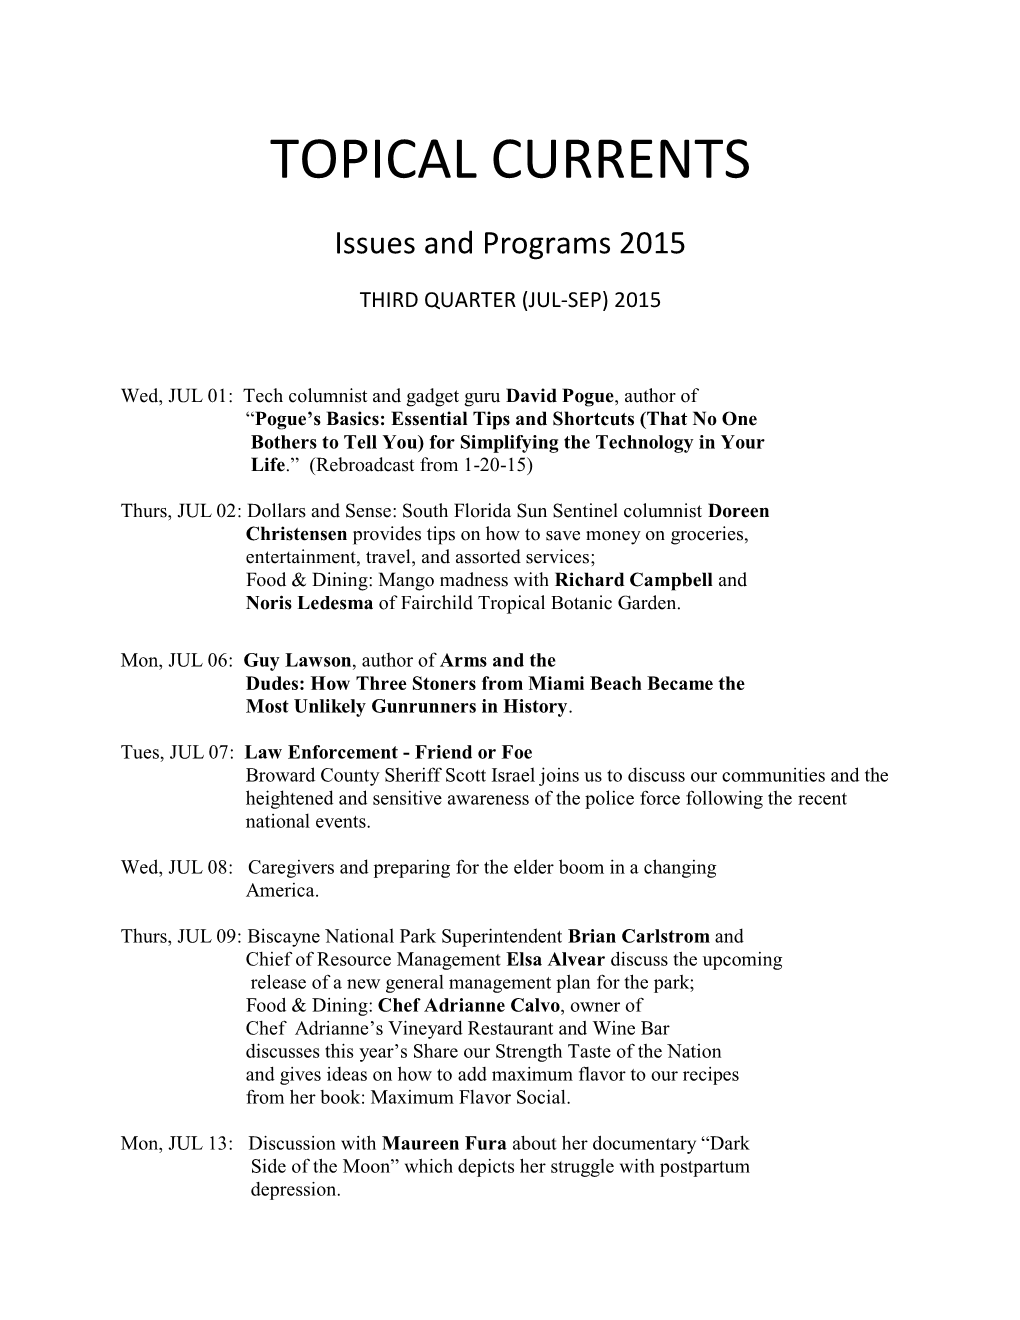 Topical Currents